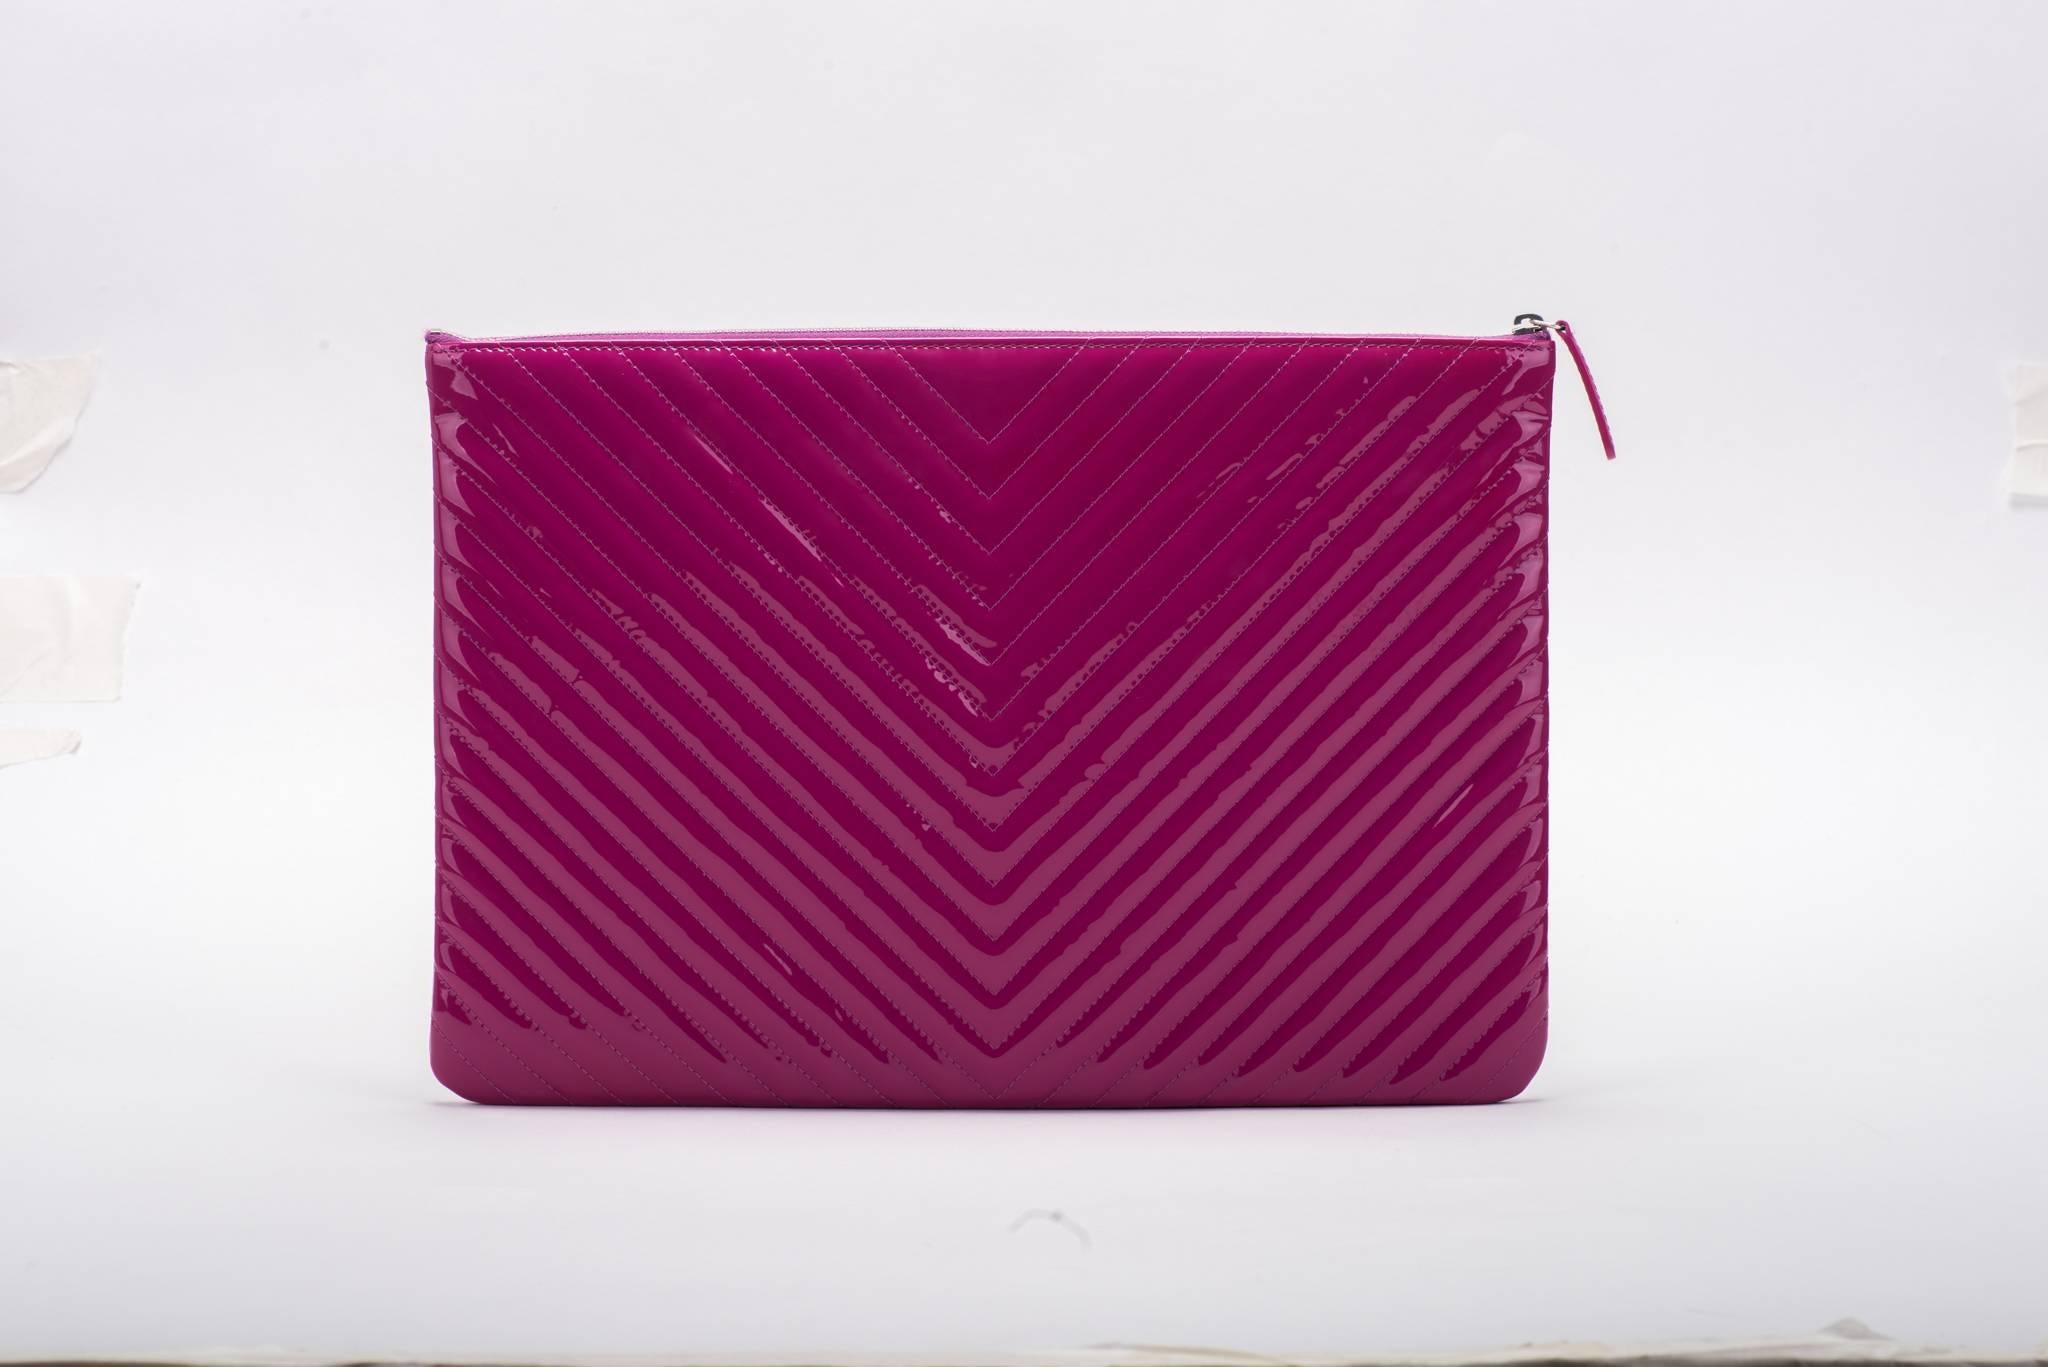 Chanel brand new in box chevron magenta patent leather quilted clutch. Signature CC center logo. Comes with hologram, ID card, booklet, box and ribbon.